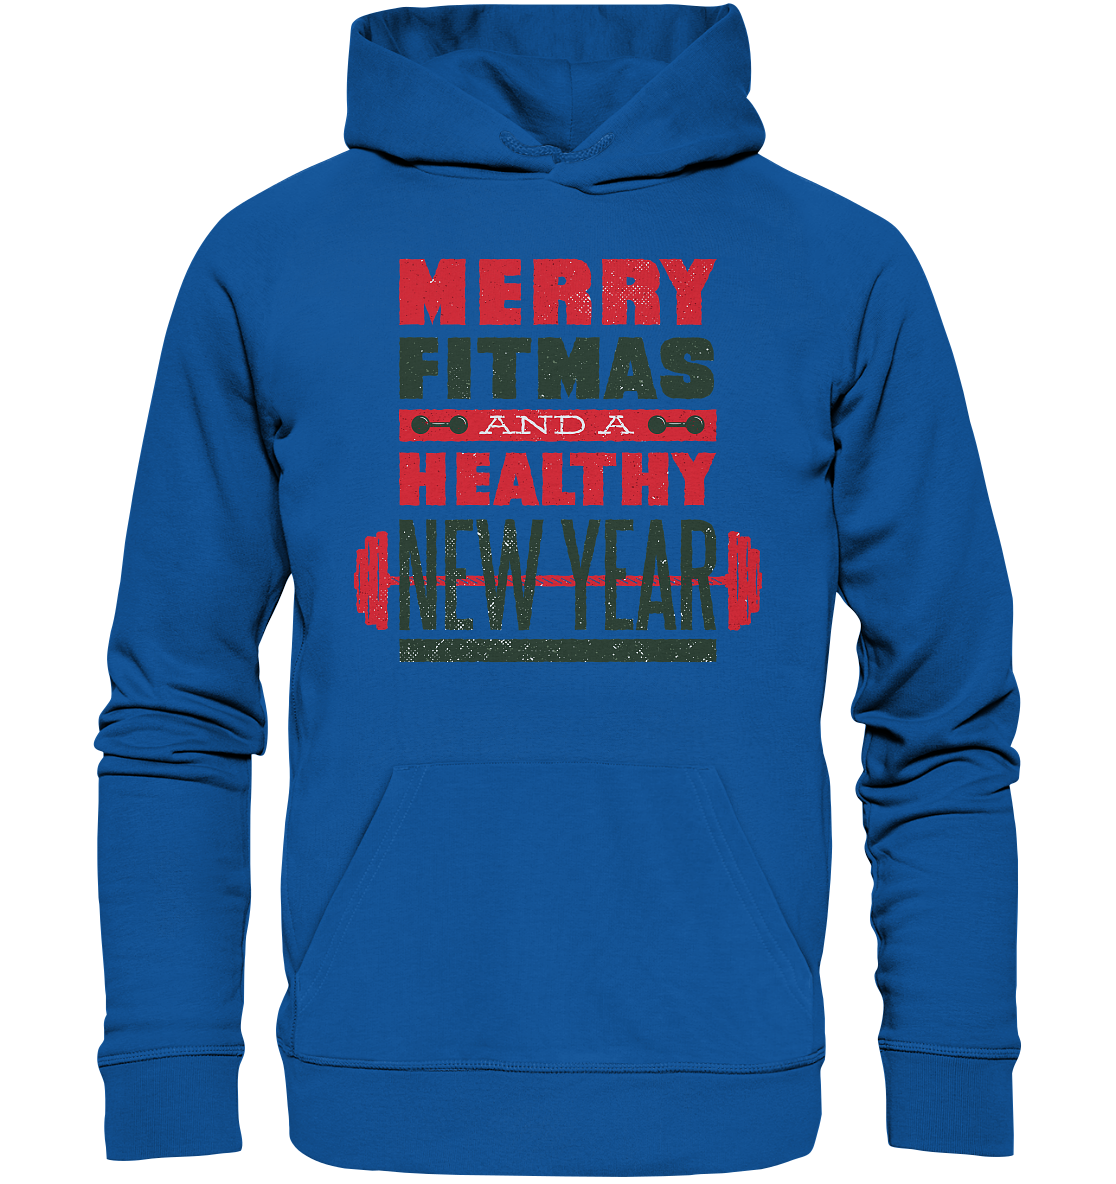 Christmas design, Gym, Merry Fitmas and a Healthy New Year - Organic Basic Hoodie